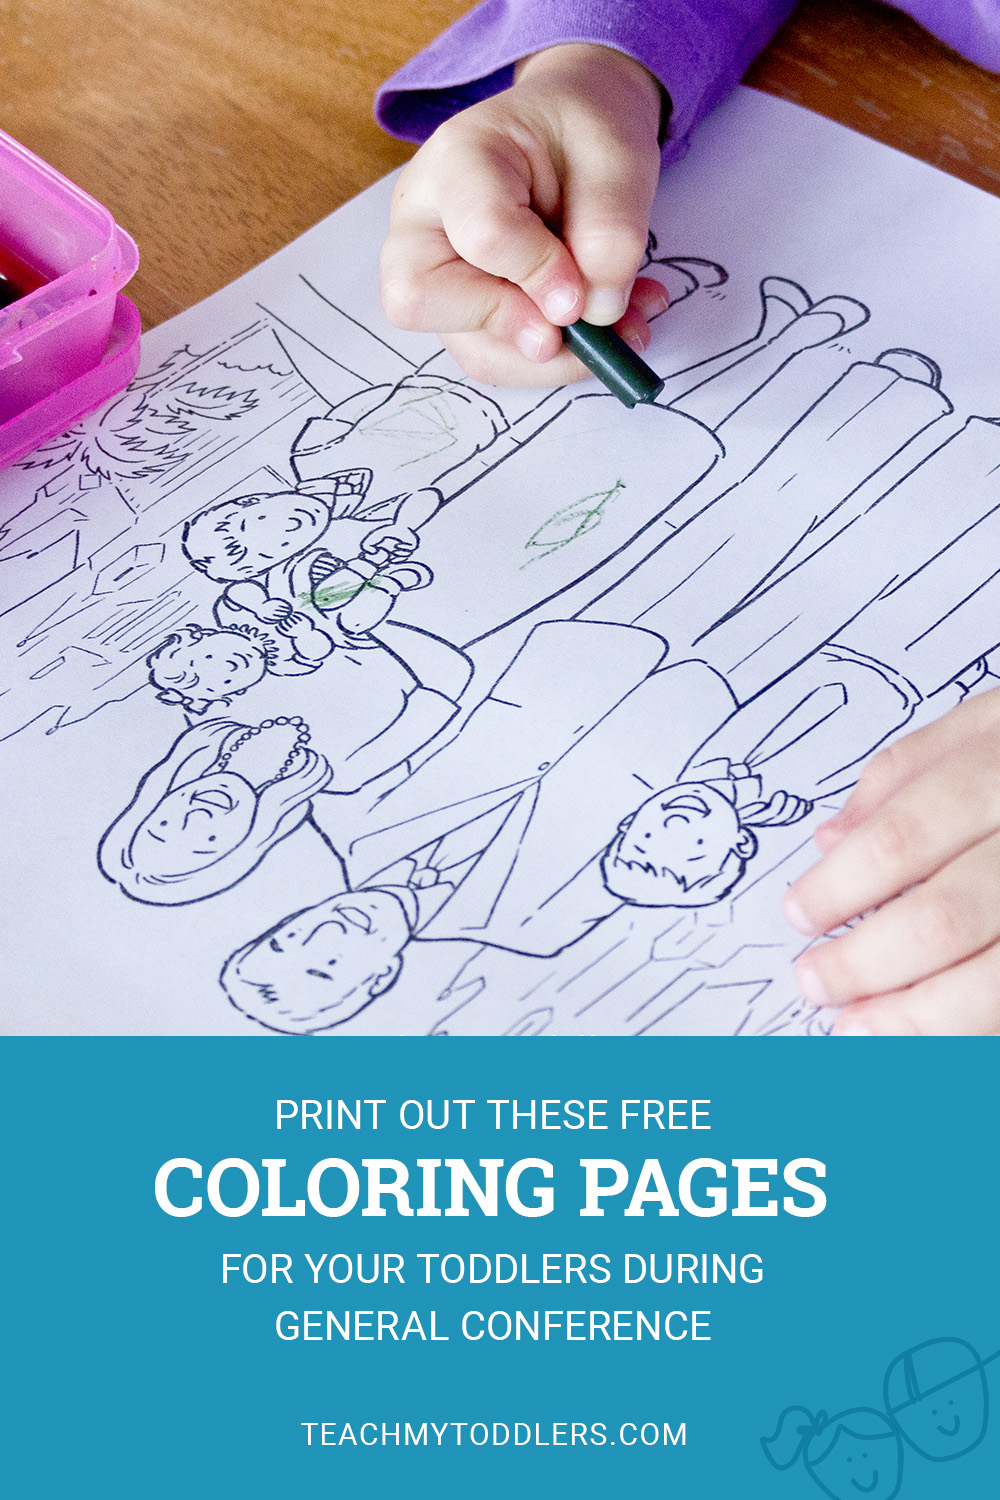 Print out these free coloring pages for your toddlers during general conference